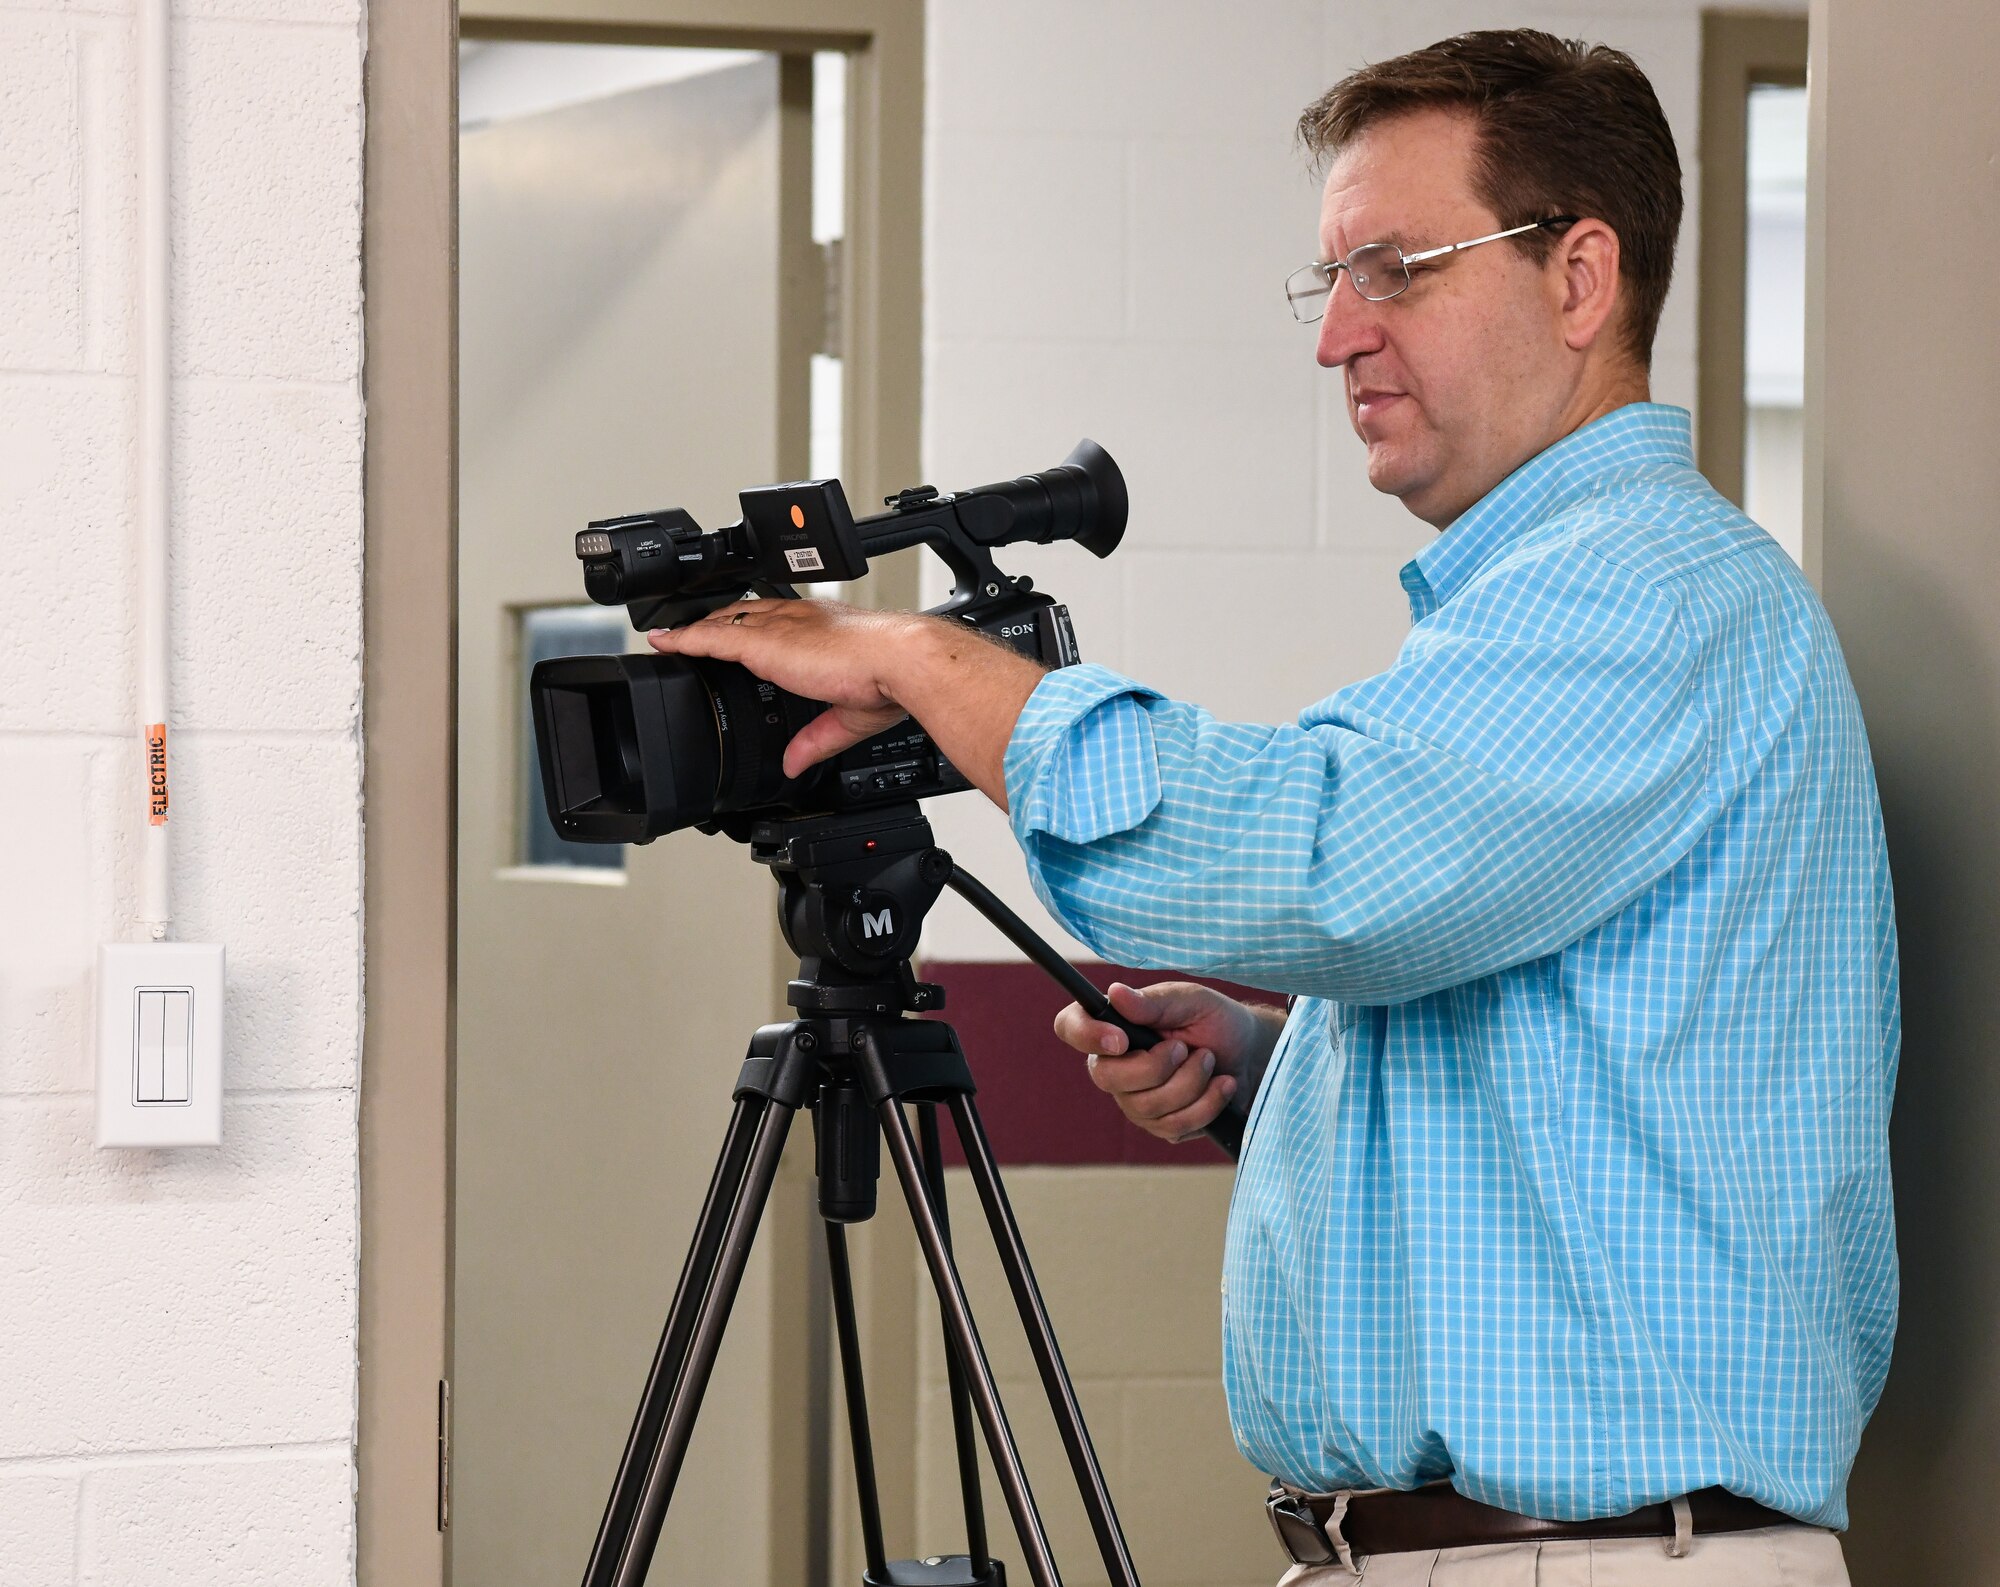 David Wright, who works in Public Affairs, shoots video at Arnold Air Force Base. (U.S. Air Force photo by Jill Pickett)